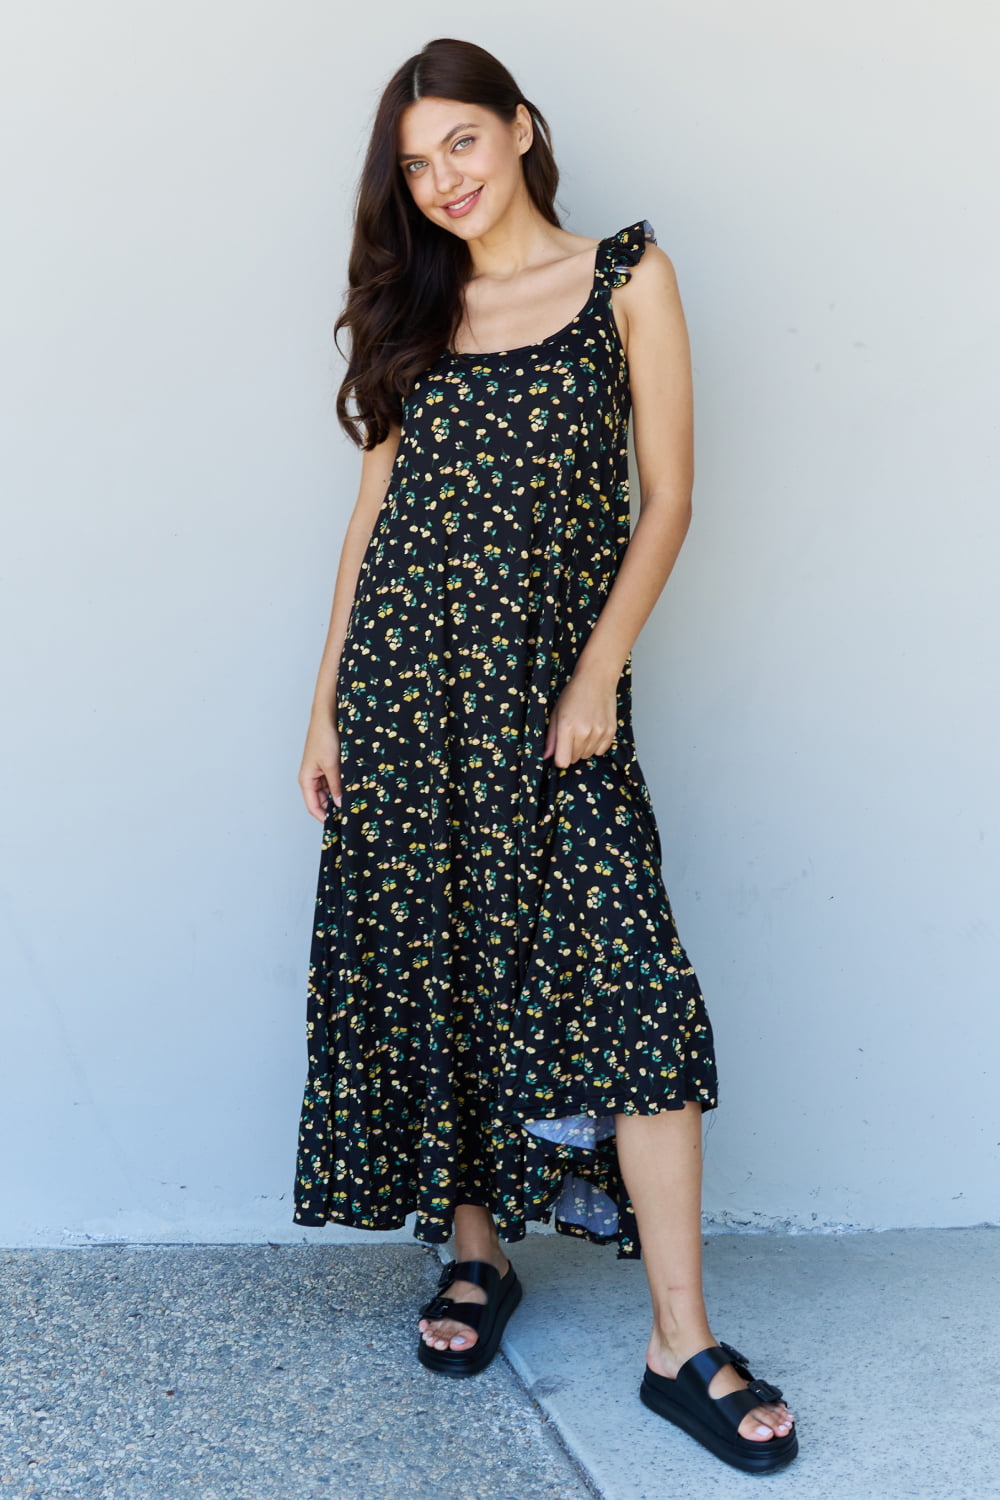 Ruffle Floral Maxi Dress in  Black Yellow Floral